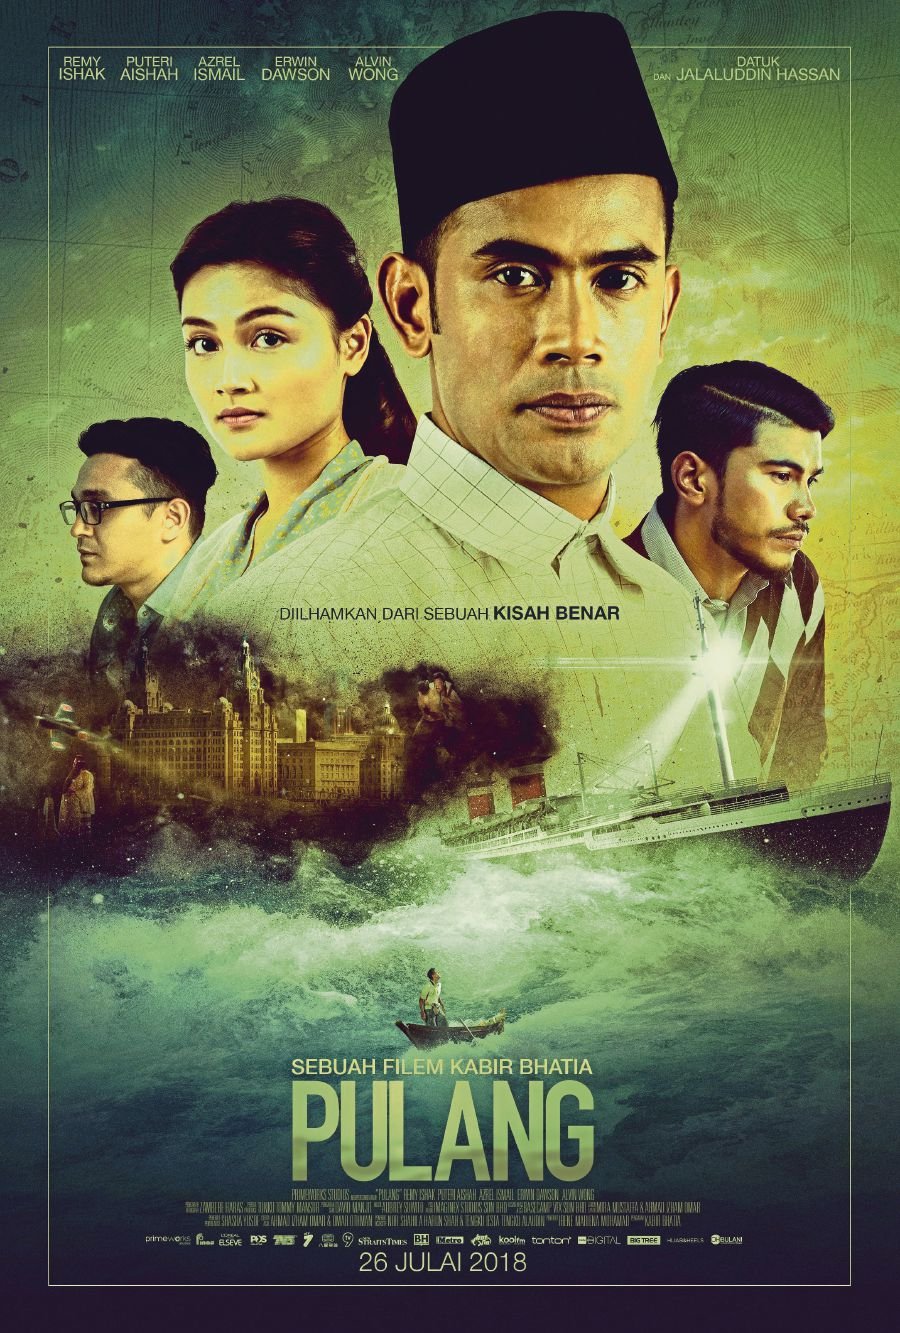 Pak Cik Md Nor served as a source of invaluable insight for the film ‘Pulang’, and one of the characters for the 2019 blockbuster was inspired by him.